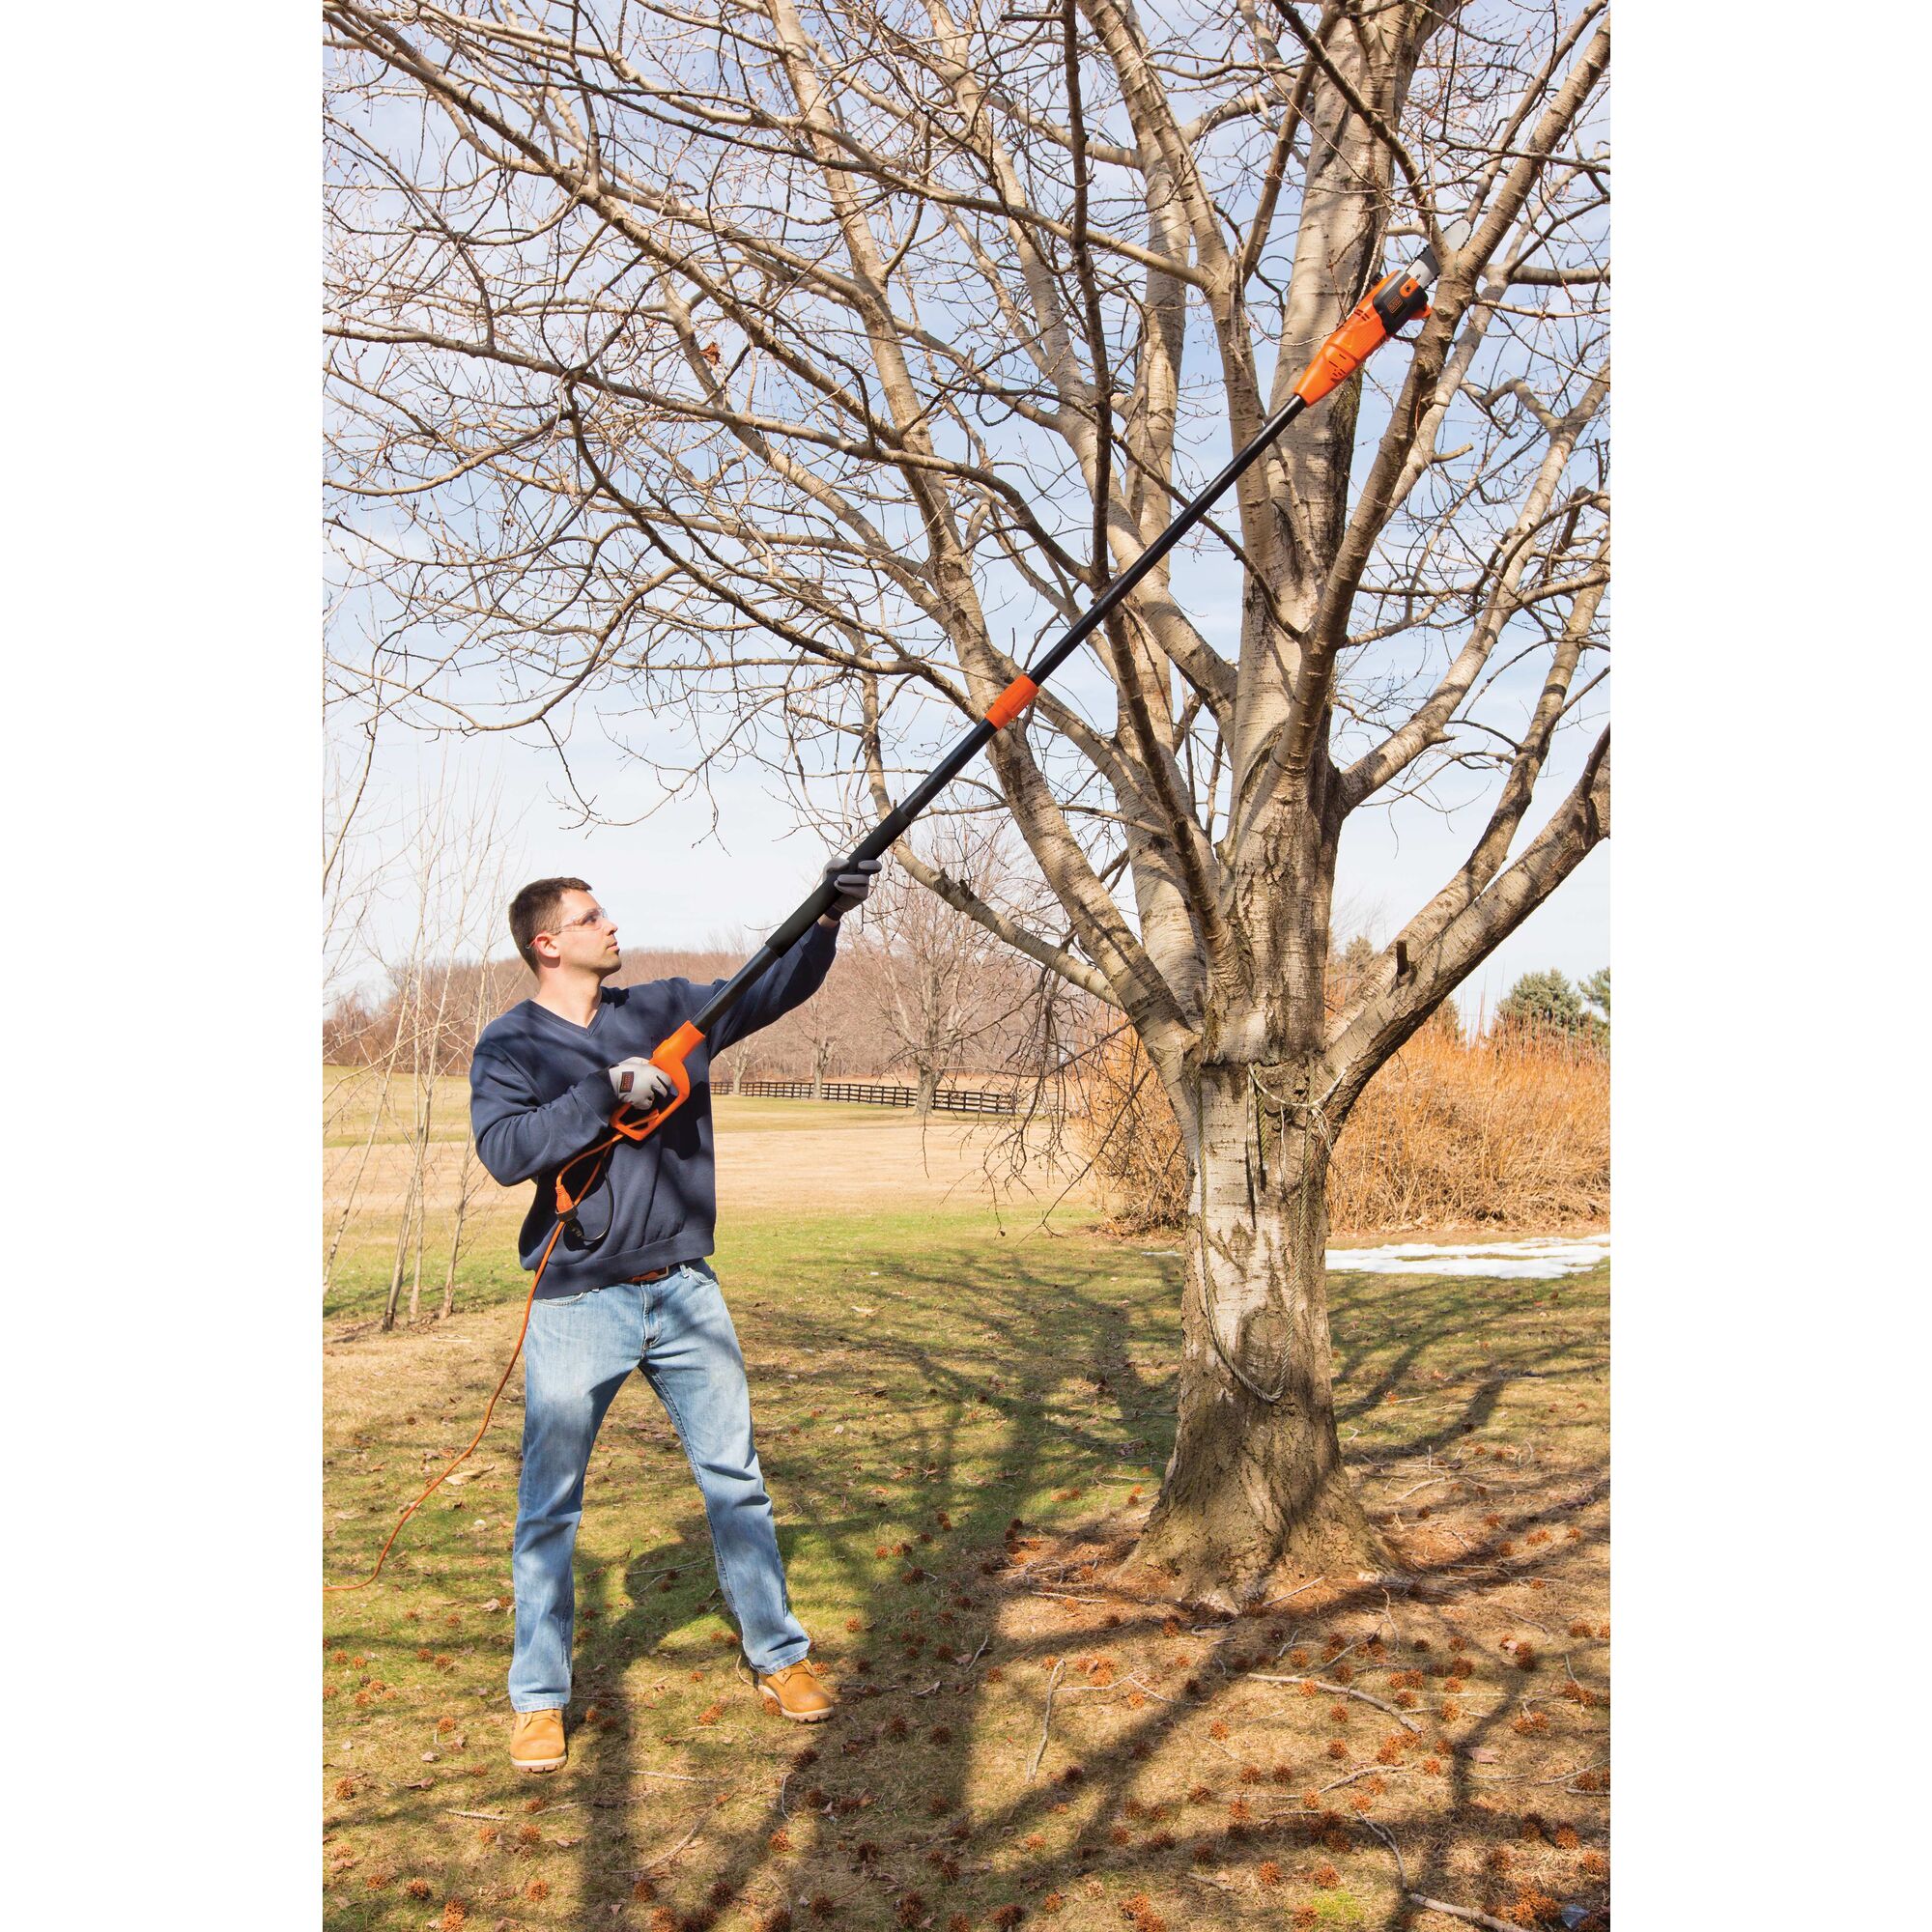 Man using 6.5 Amp 9-1/2 foot Pole Saw with cut branches from a bare tree.